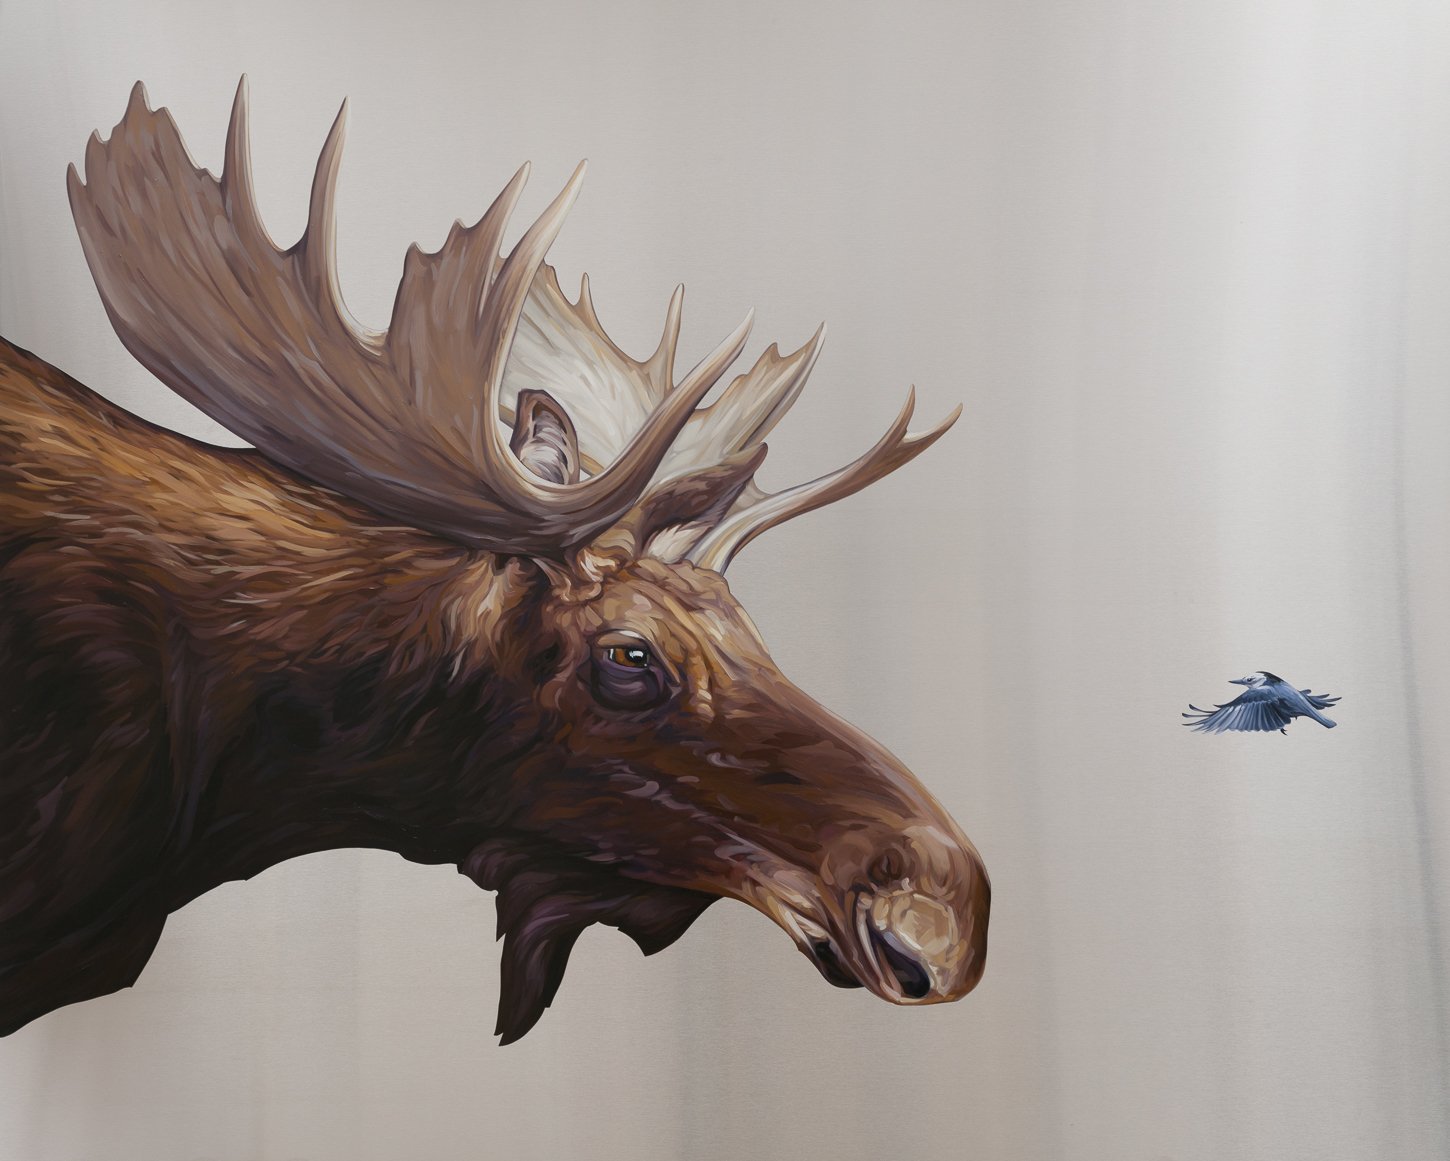  Moose (King of the Forest) with Nuthatch. Oil on stainless steel, 40in x 54in 